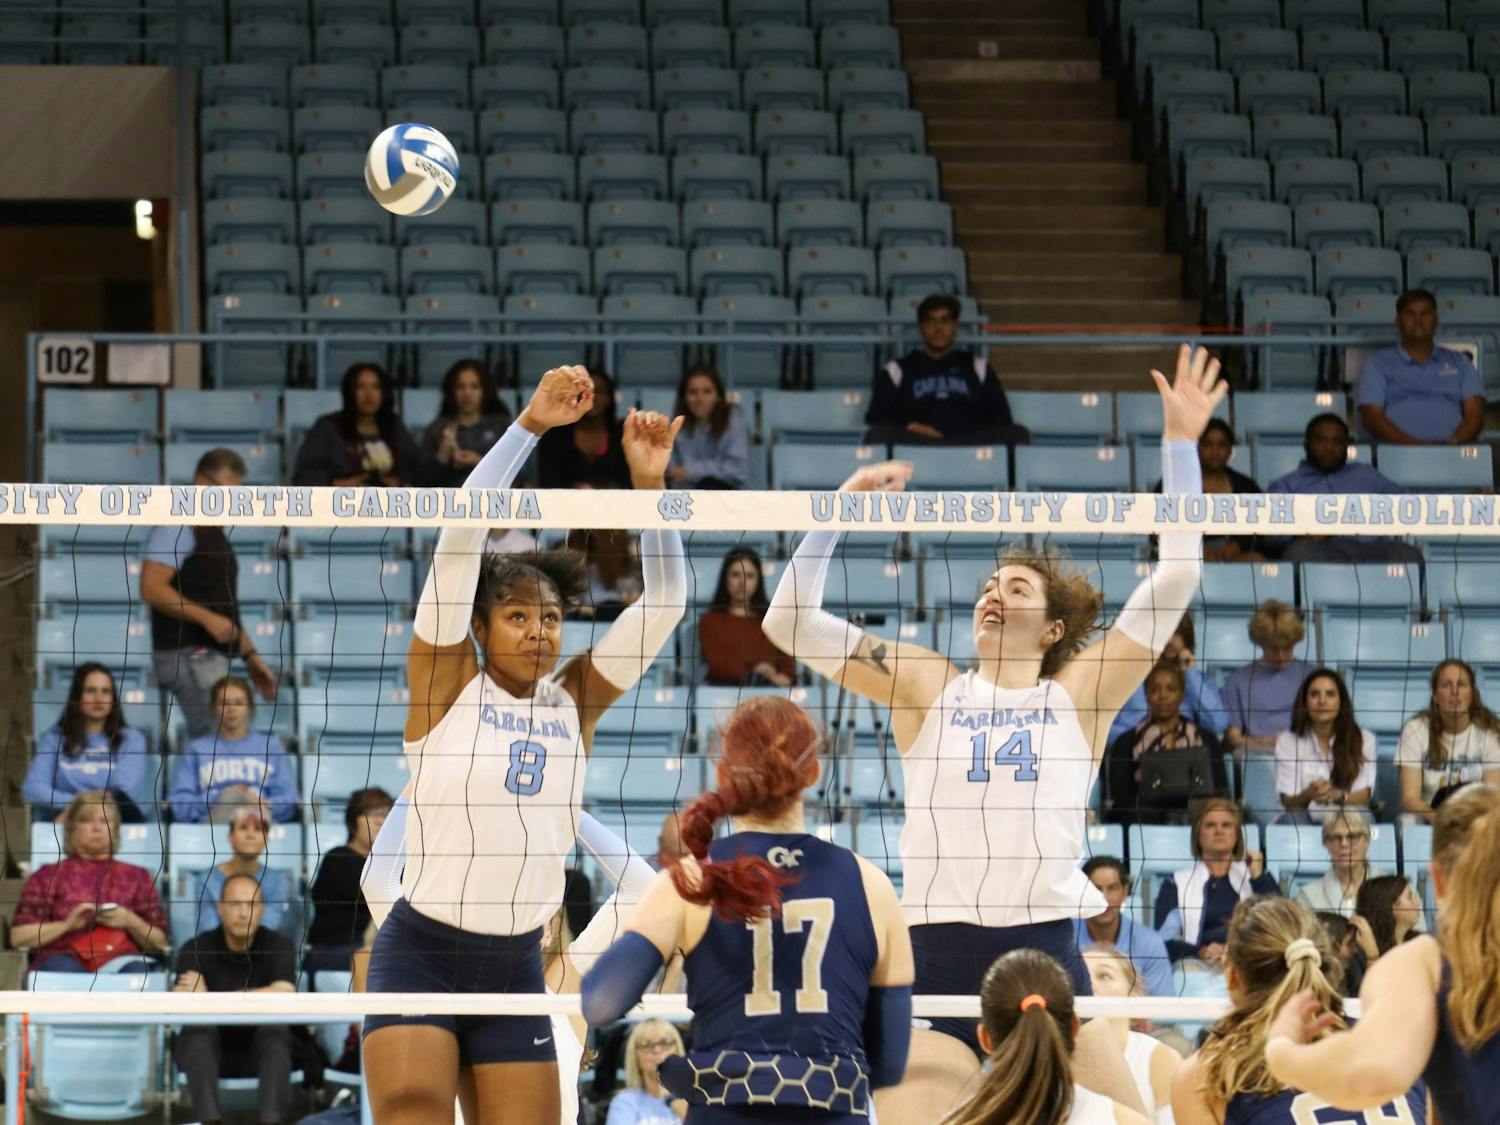 UNC senior middle hitter Skyy Howard (8) and junior middle hitter Kaya Merkler (14) block the ball during the volleyball match against Georgia Tech on Friday, Oct. 28, 2022 at Carmichael Arena. UNC lost 3-1.